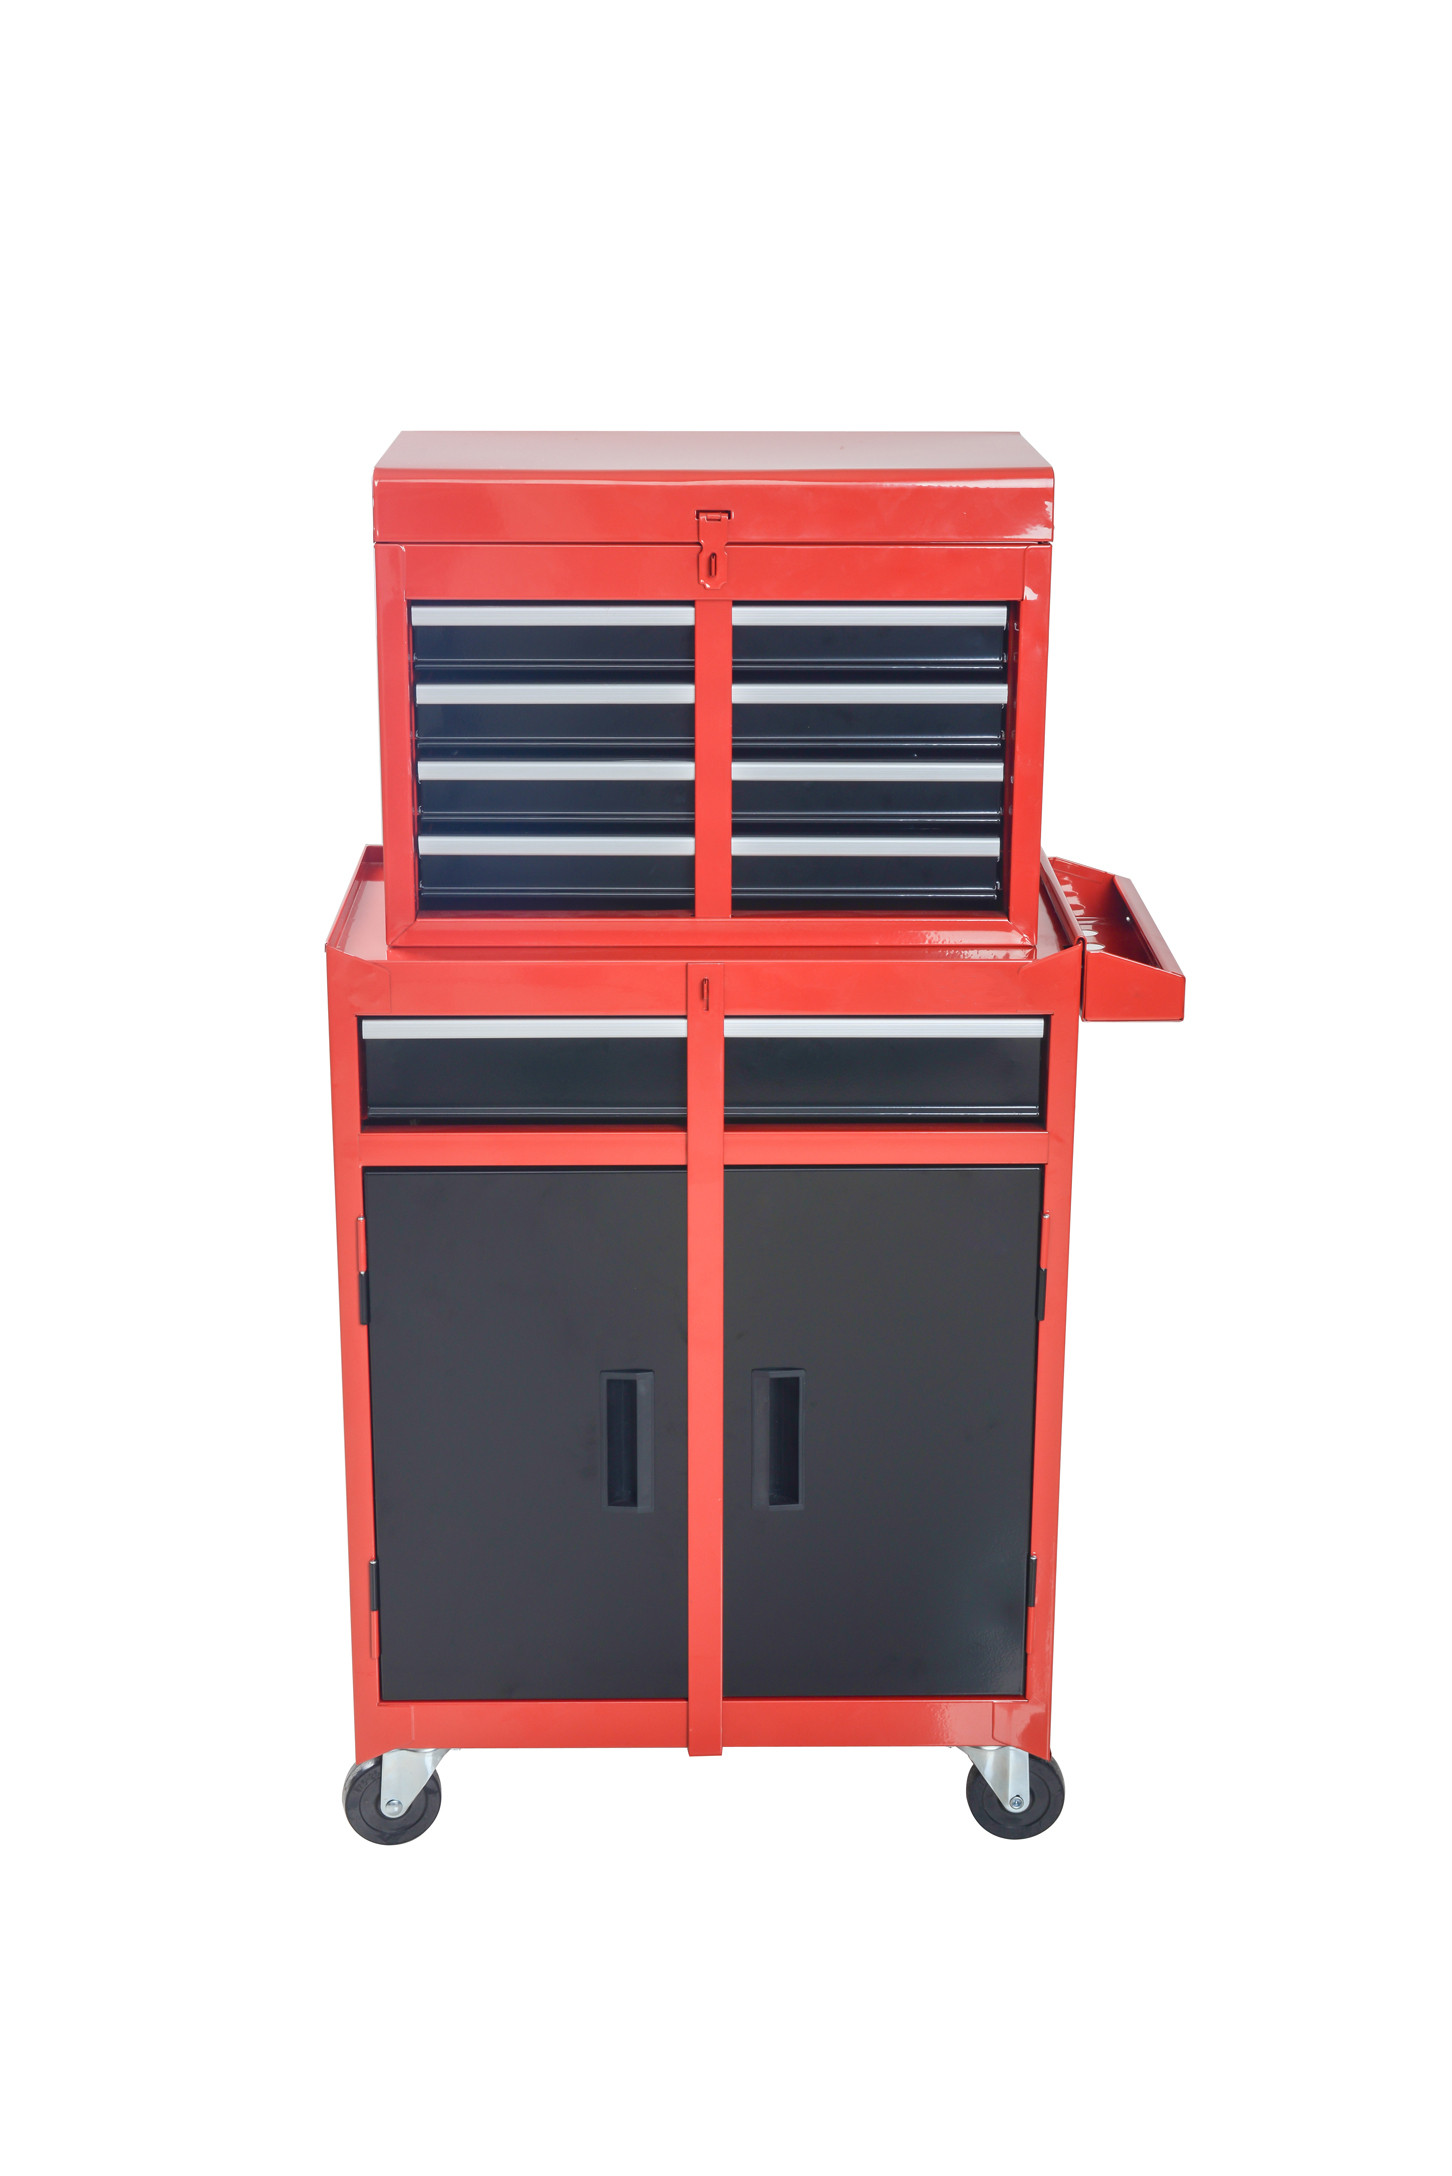 2 in 1 Tool Cabinet Combo